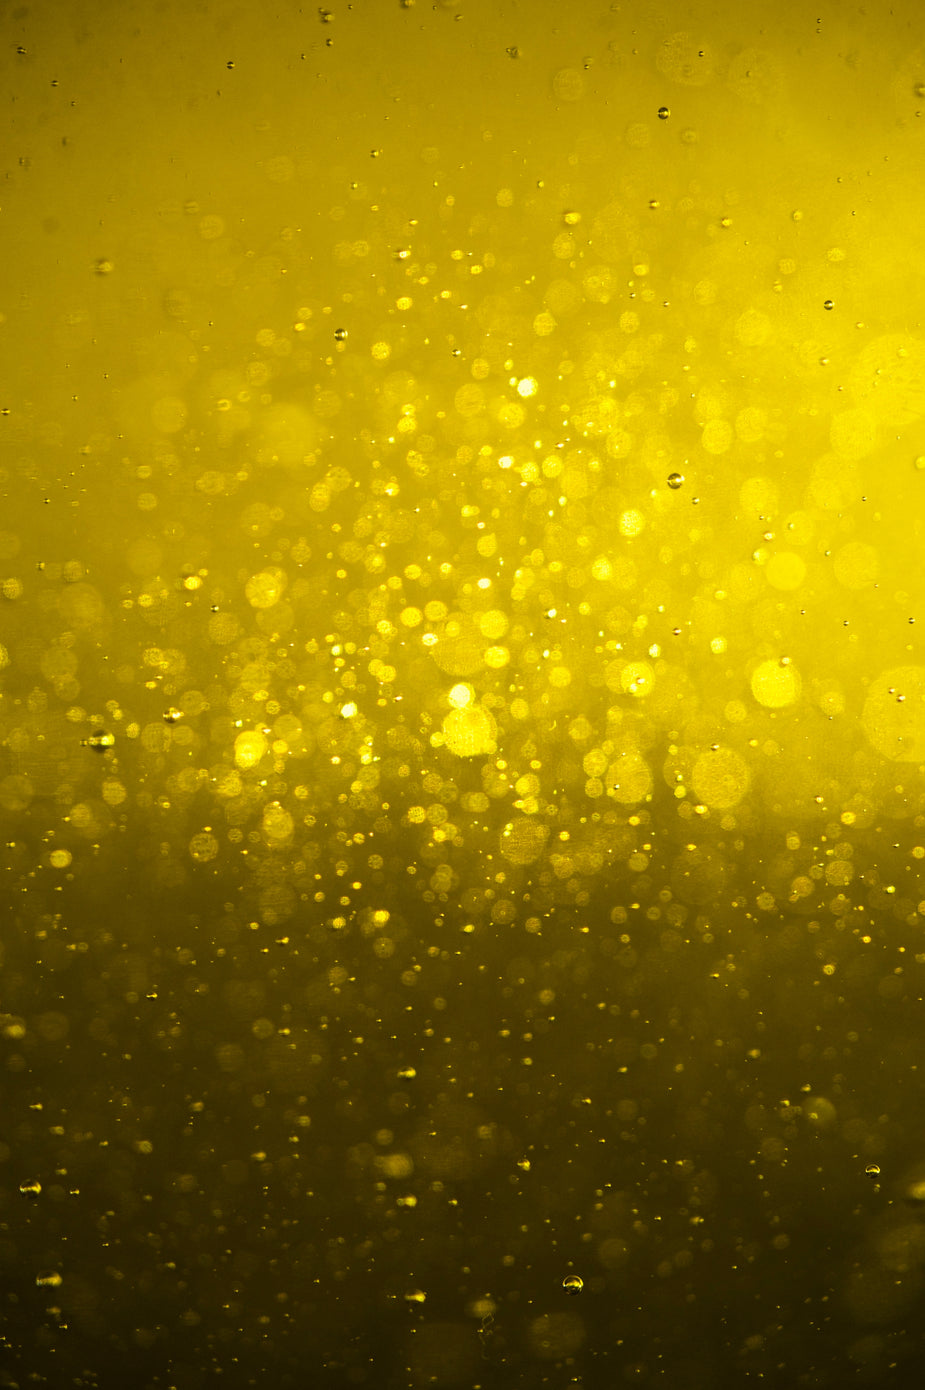 Premium Photo  A close up of yellow felt material texture. high resolution  photo.